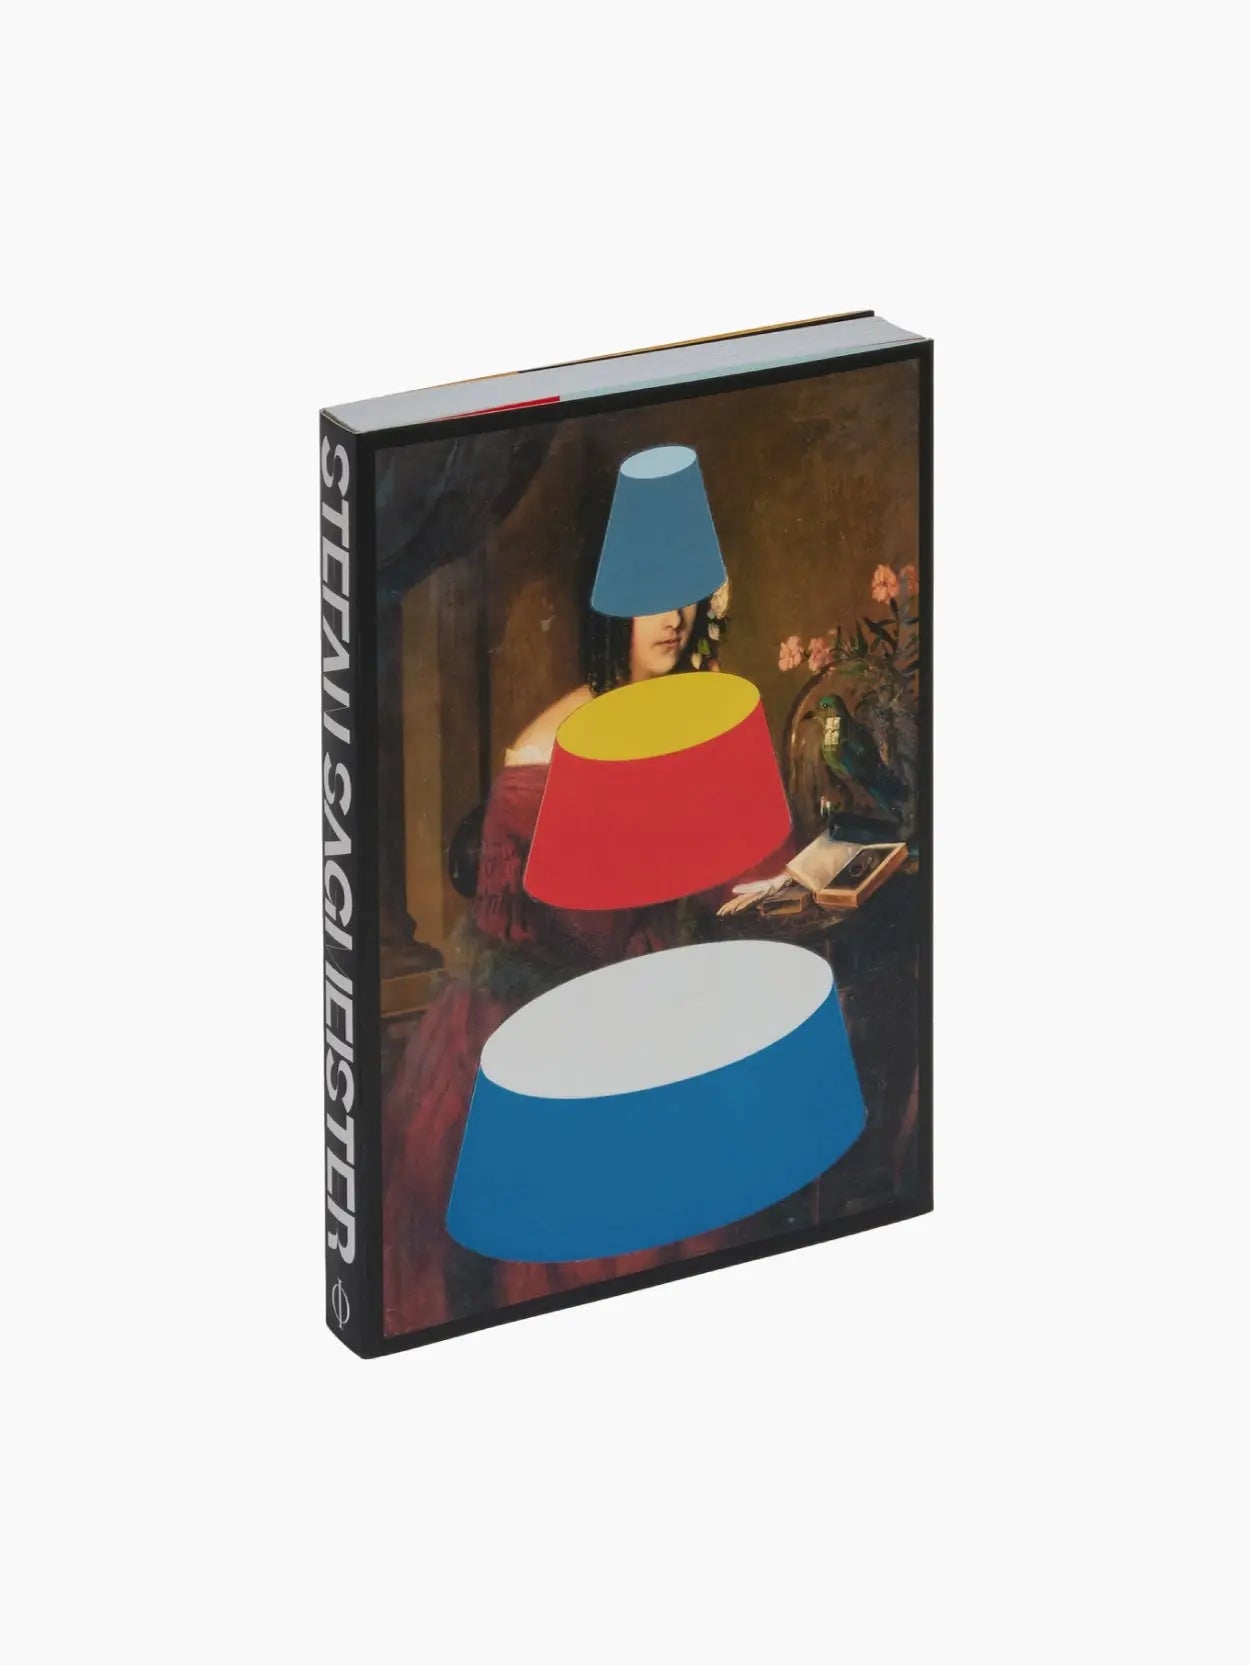 A book titled "Stefan Sagmeister: Now Is Better" by Phaidon stands upright against a white background. Its cover features artwork of a classical painting overlaid with graphic shapes: a blue cylinder, a yellow circle, and a red semicircular shape. Available at Bassalstore in Barcelona.